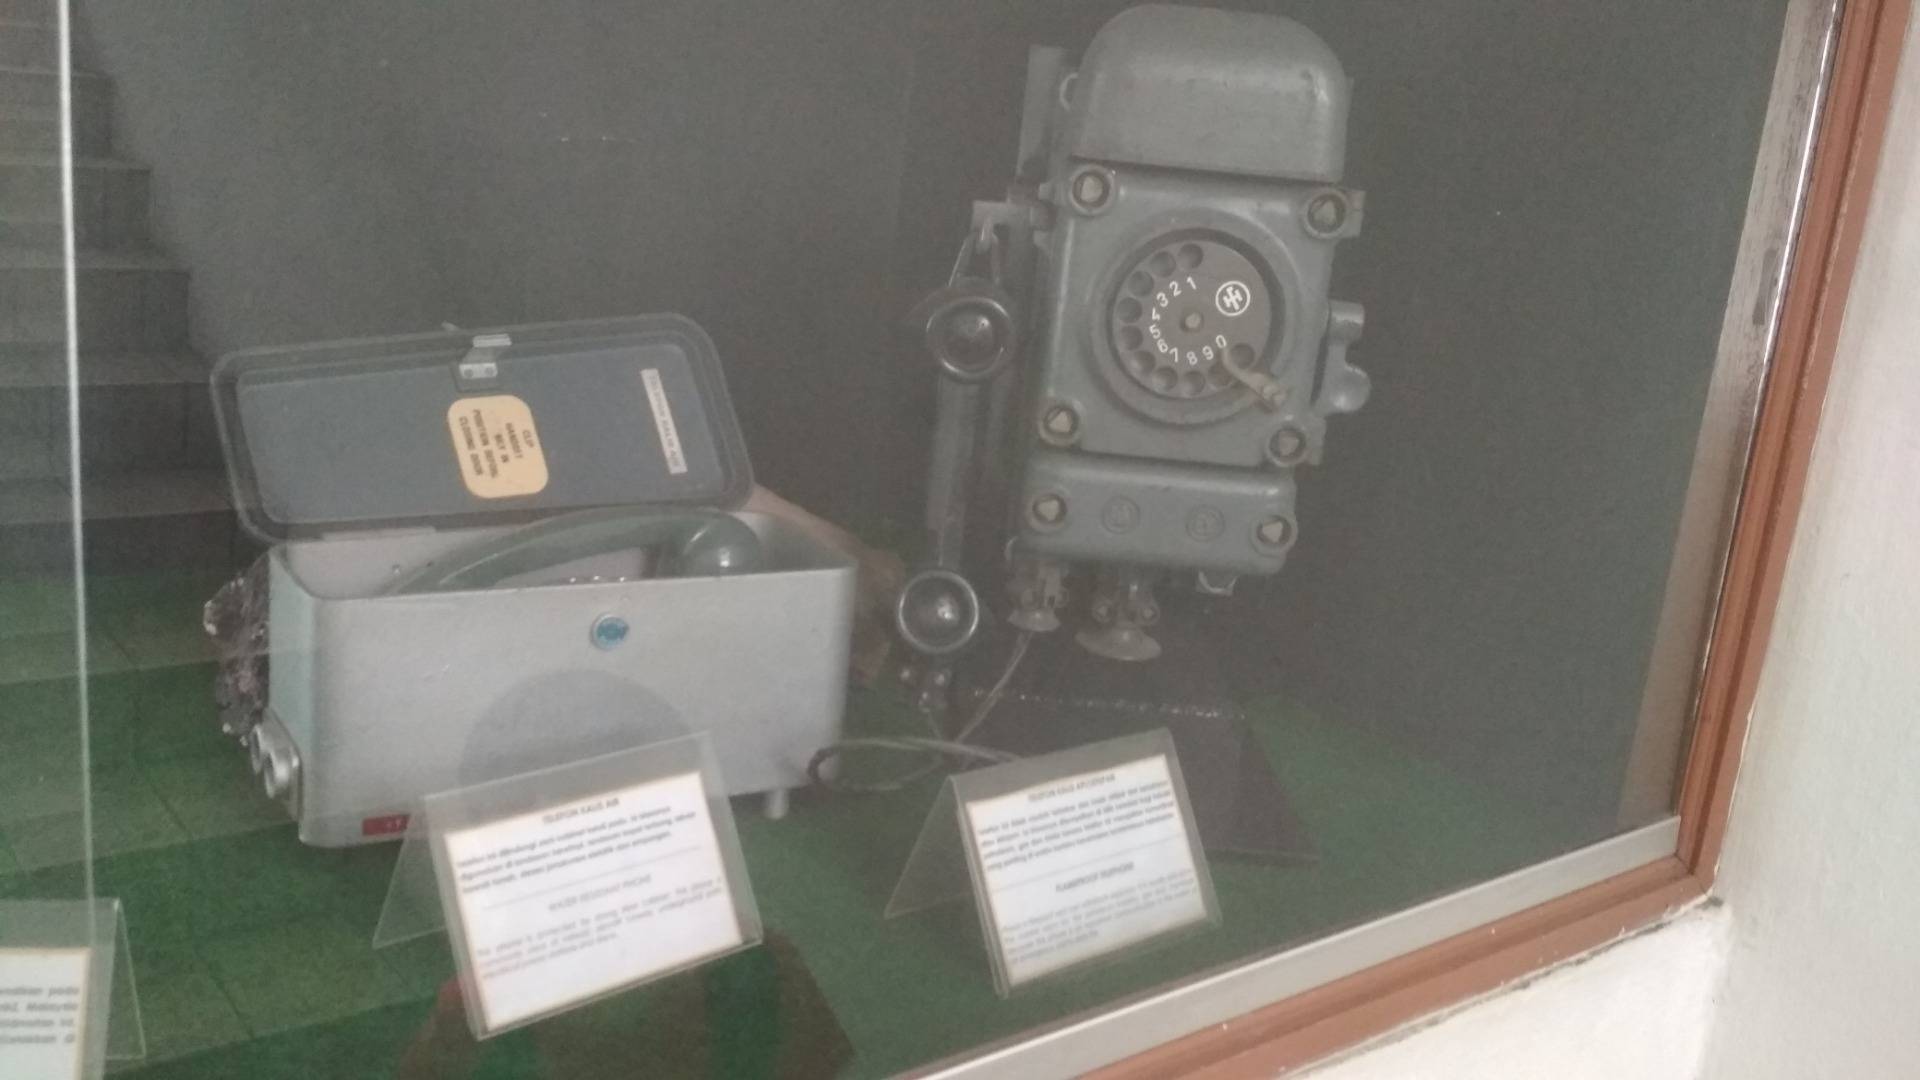 More antique phones, some of the best technology at that time